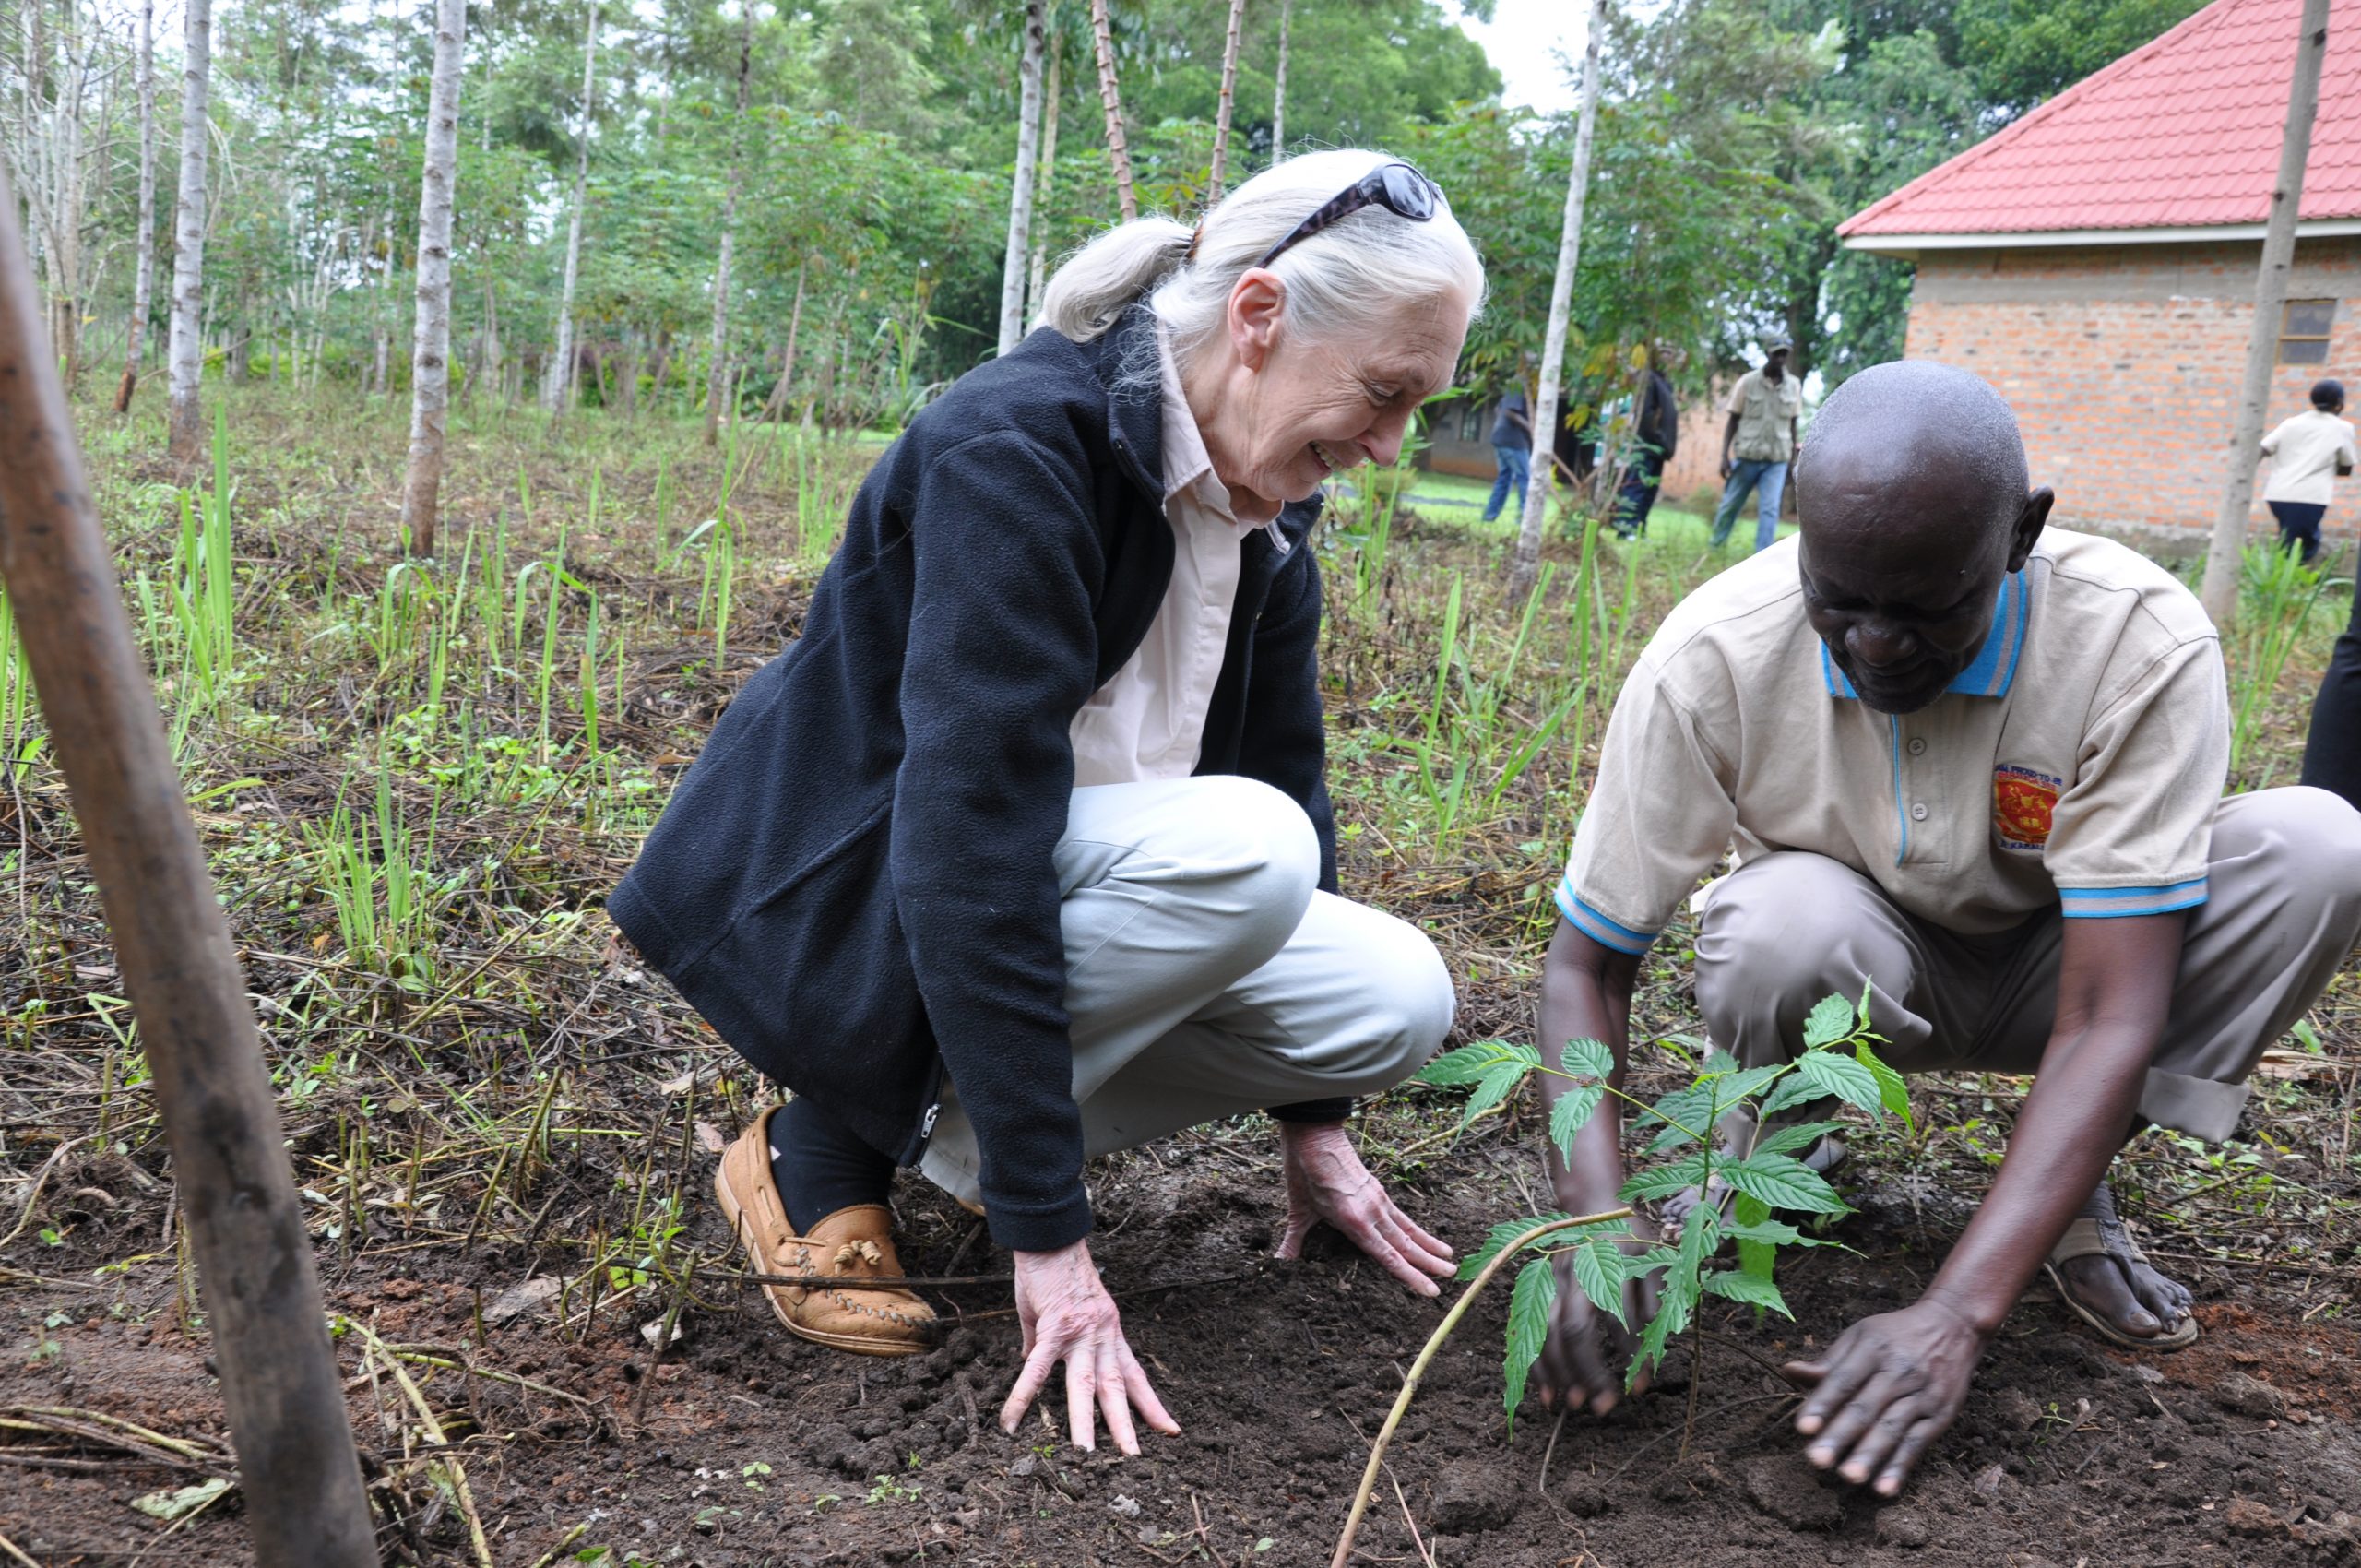 Jane Goodall Drives To Make Earth Green Again By Planting 5 Million Trees